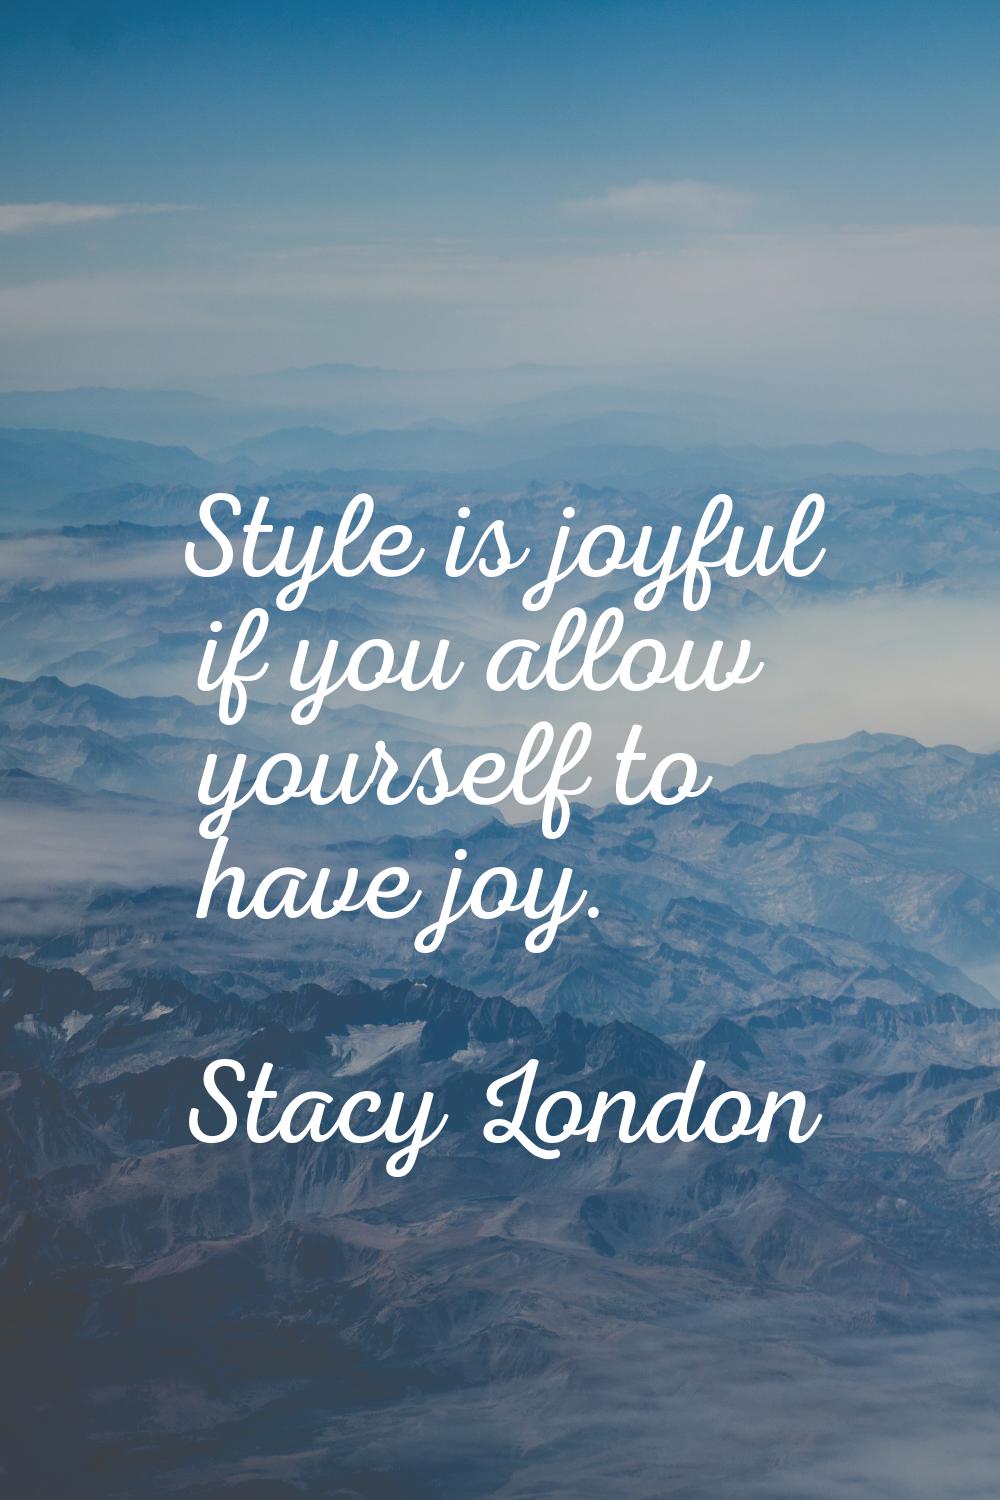 Style is joyful if you allow yourself to have joy.